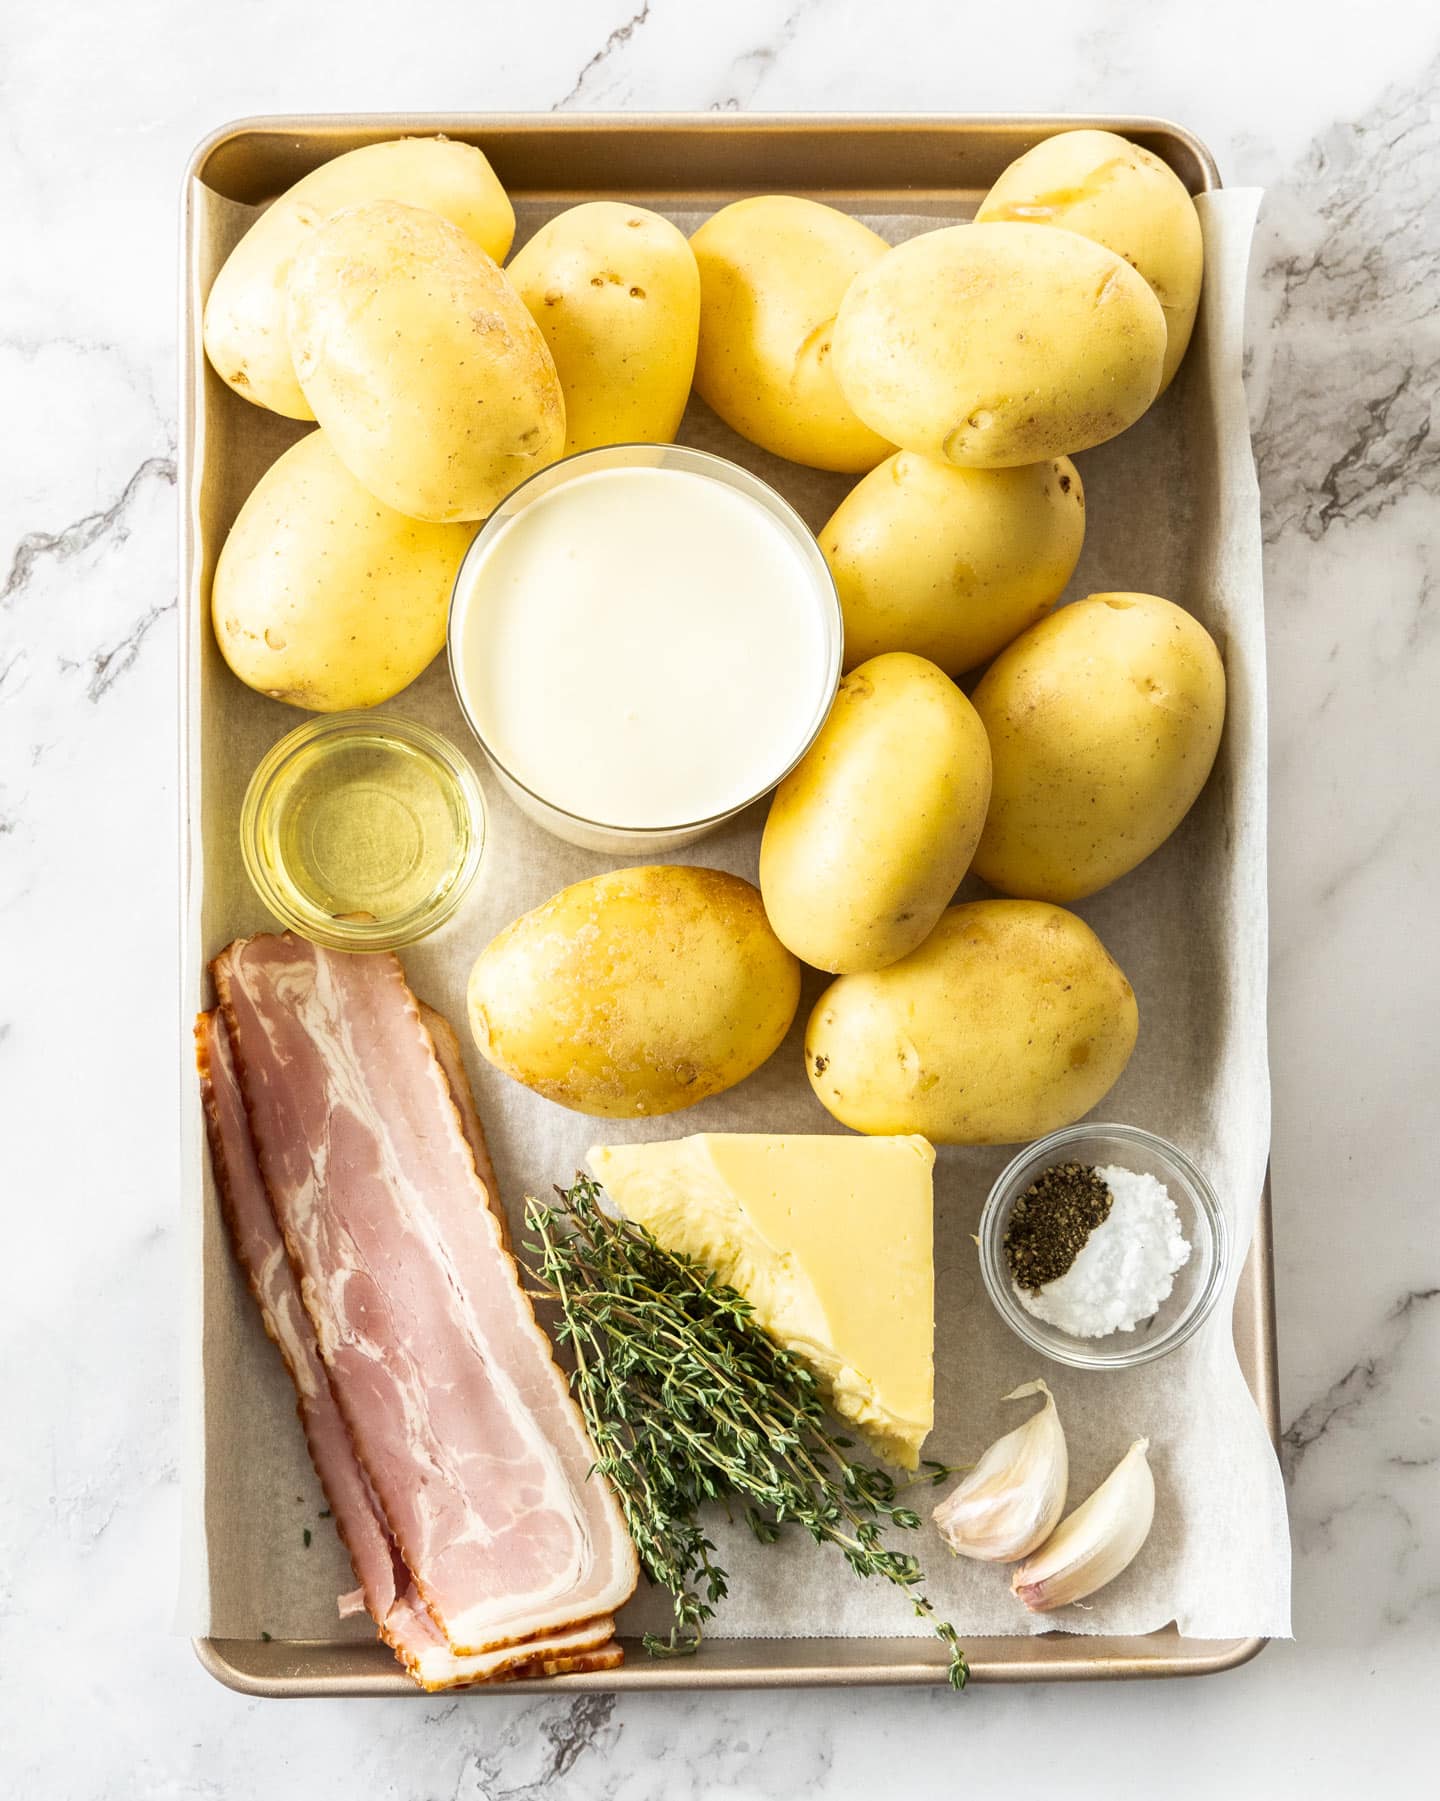 Ingredients for hasselback potato gratin on a baking tray.